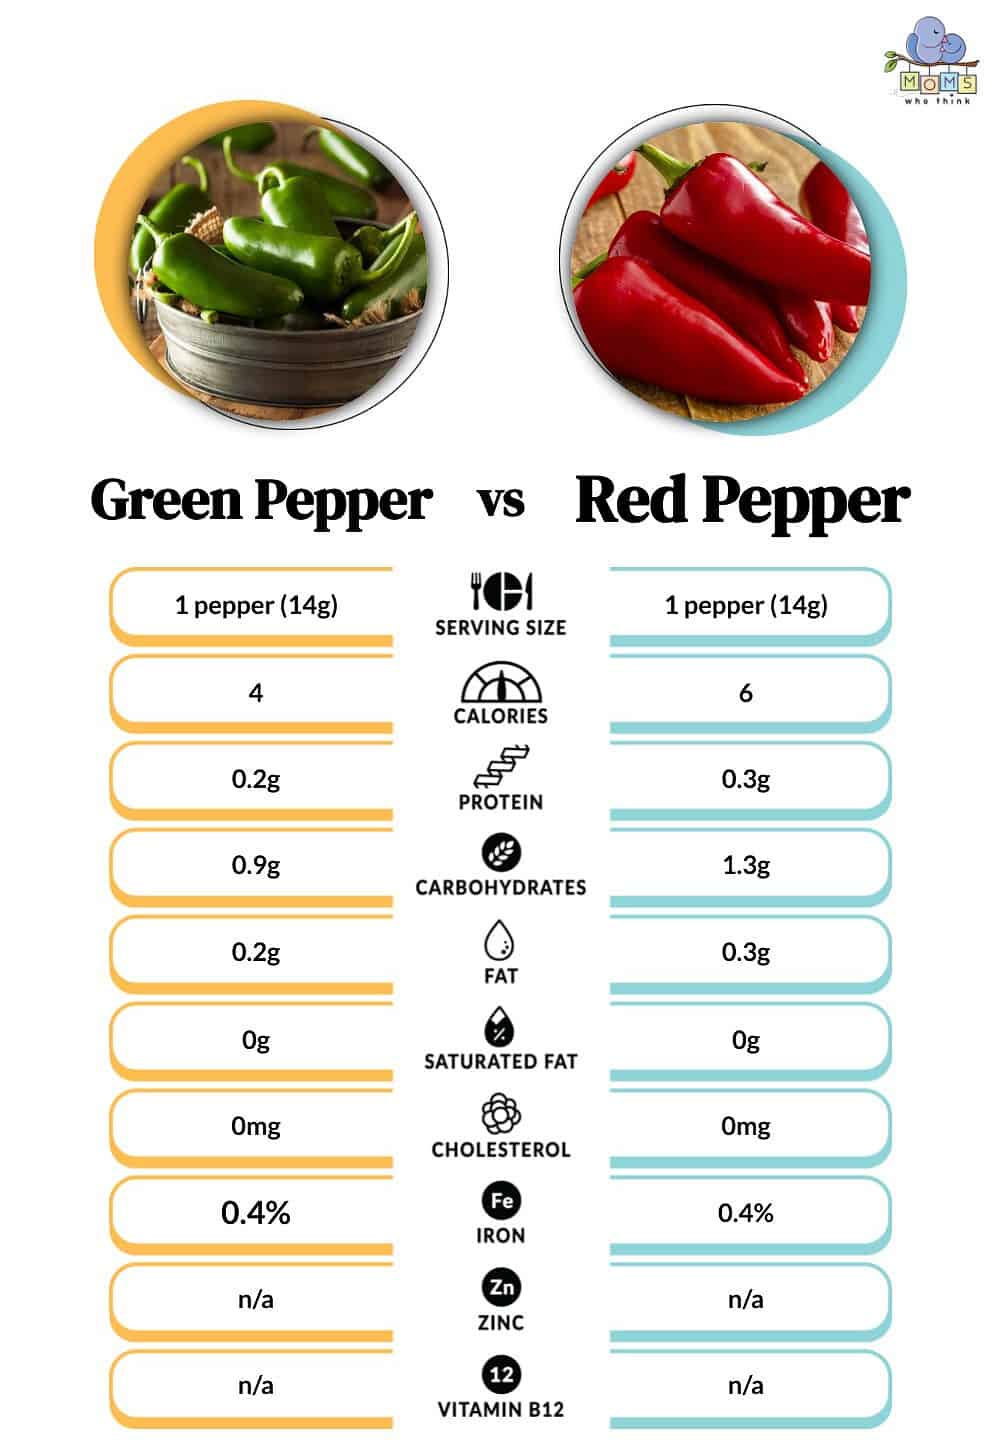 Green Pepper vs Red Pepper Nutritional Facts